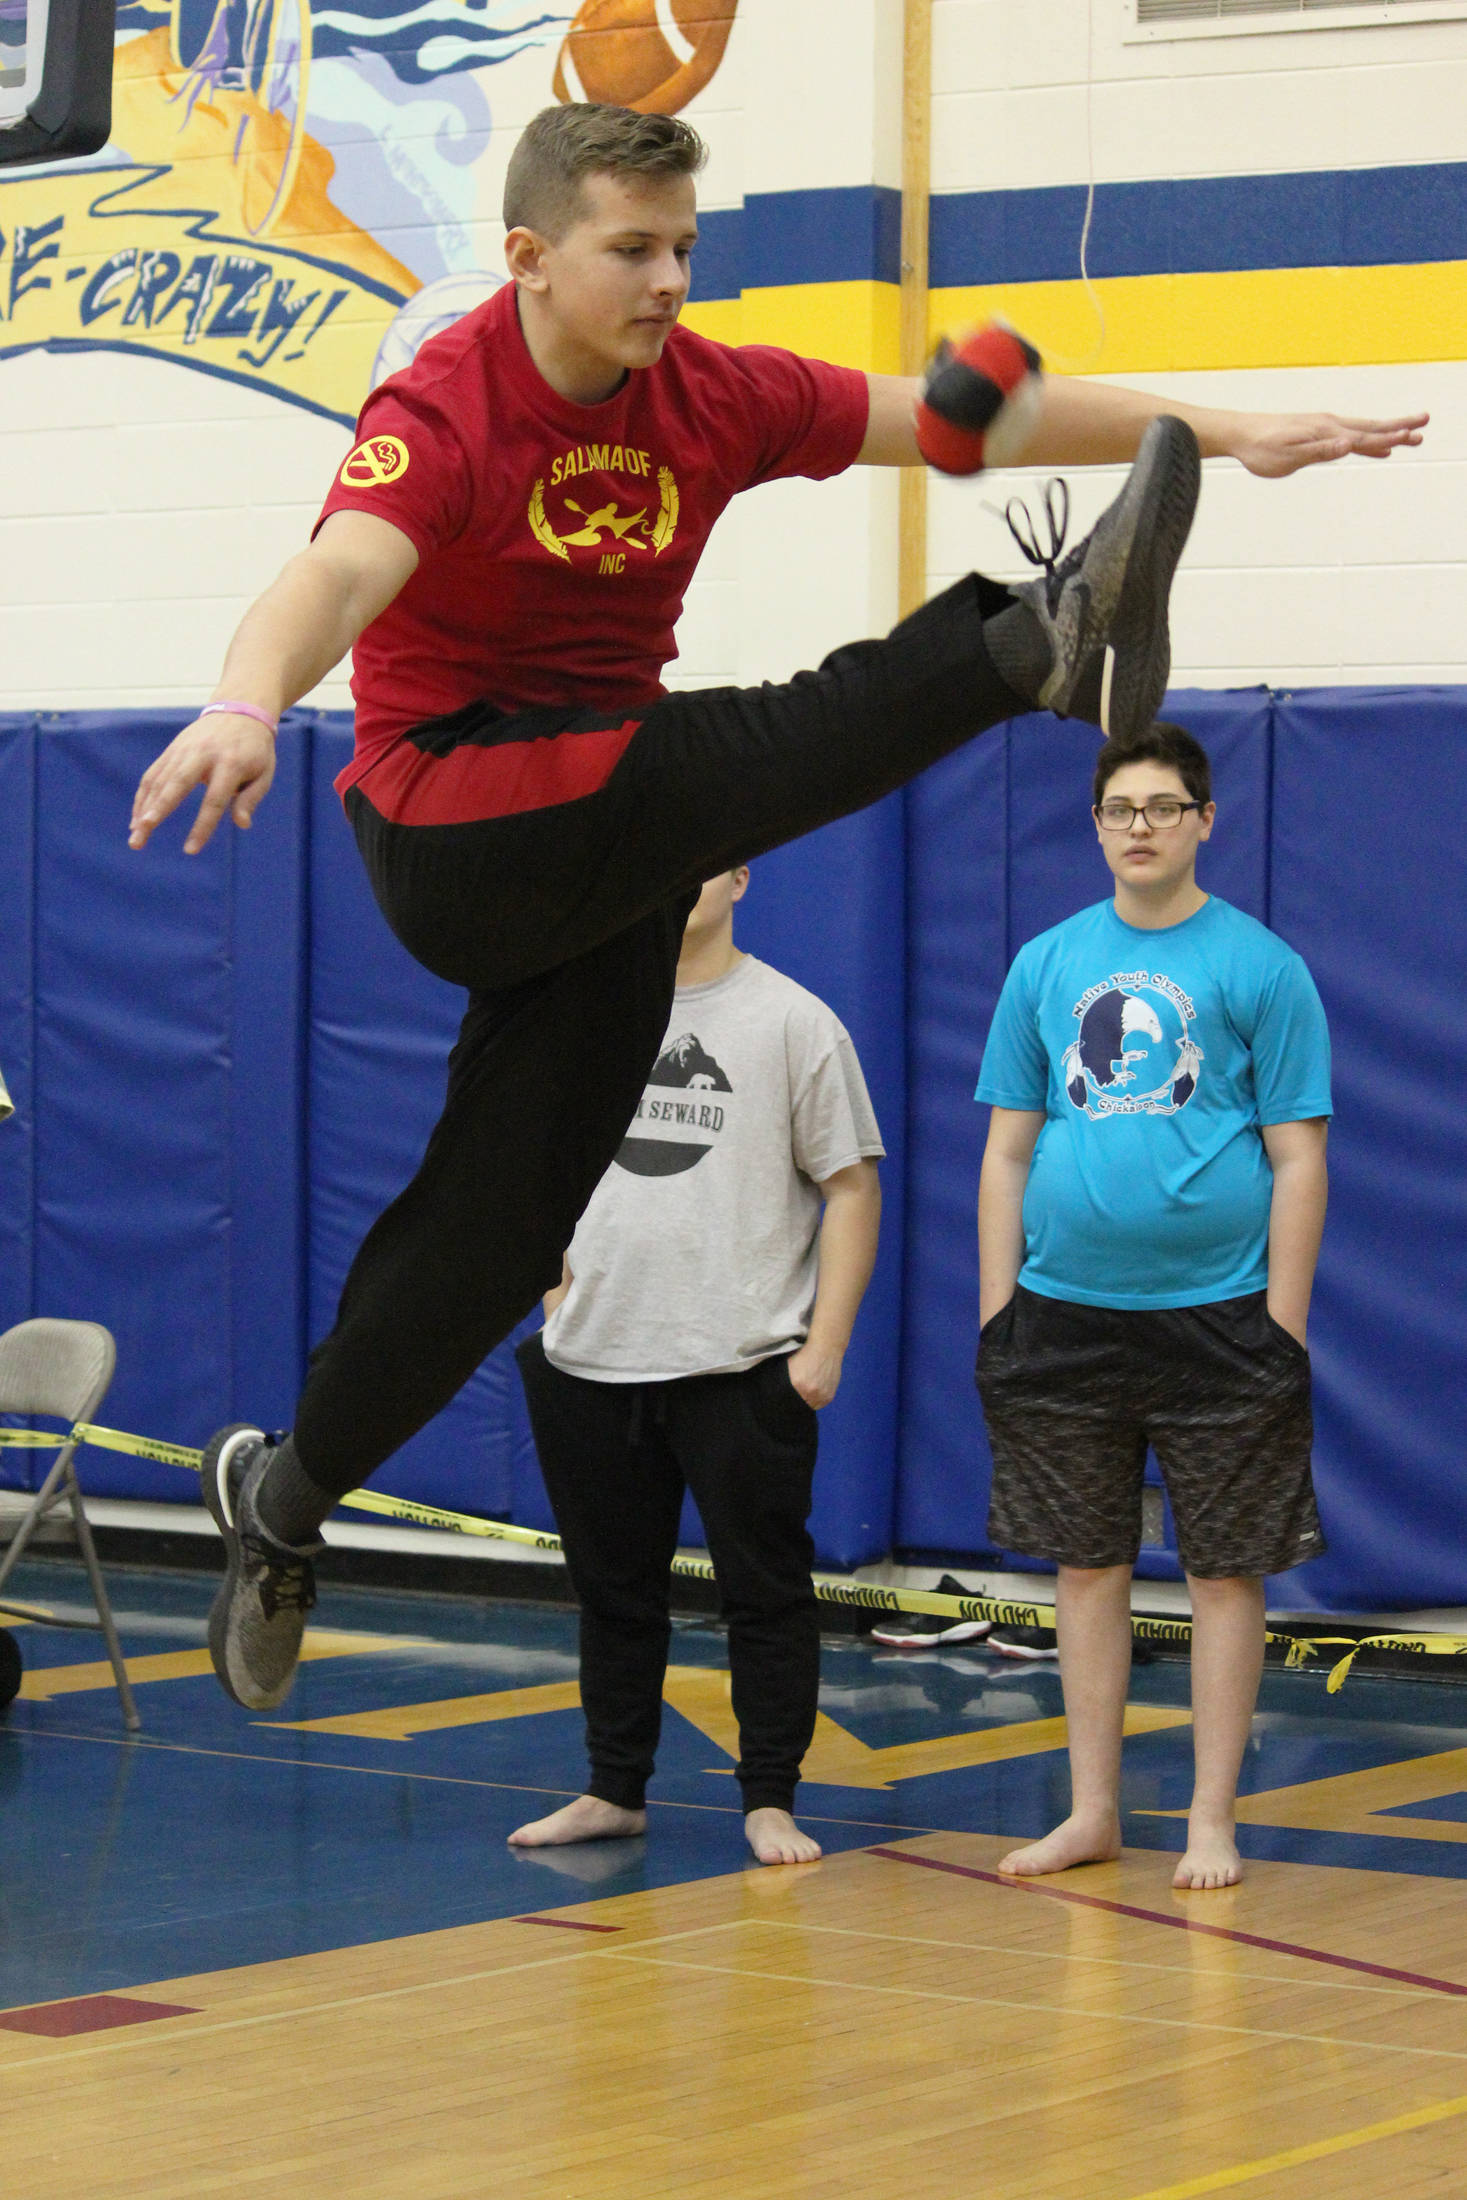 Judah Gason, 16, competes in the one-foot high kick event Saturday, March 30, 2019 during the Kachemak Bay Traditional Games invitational at Homer High School in Homer, Alaska. (Photo by Megan Pacer/Homer News)